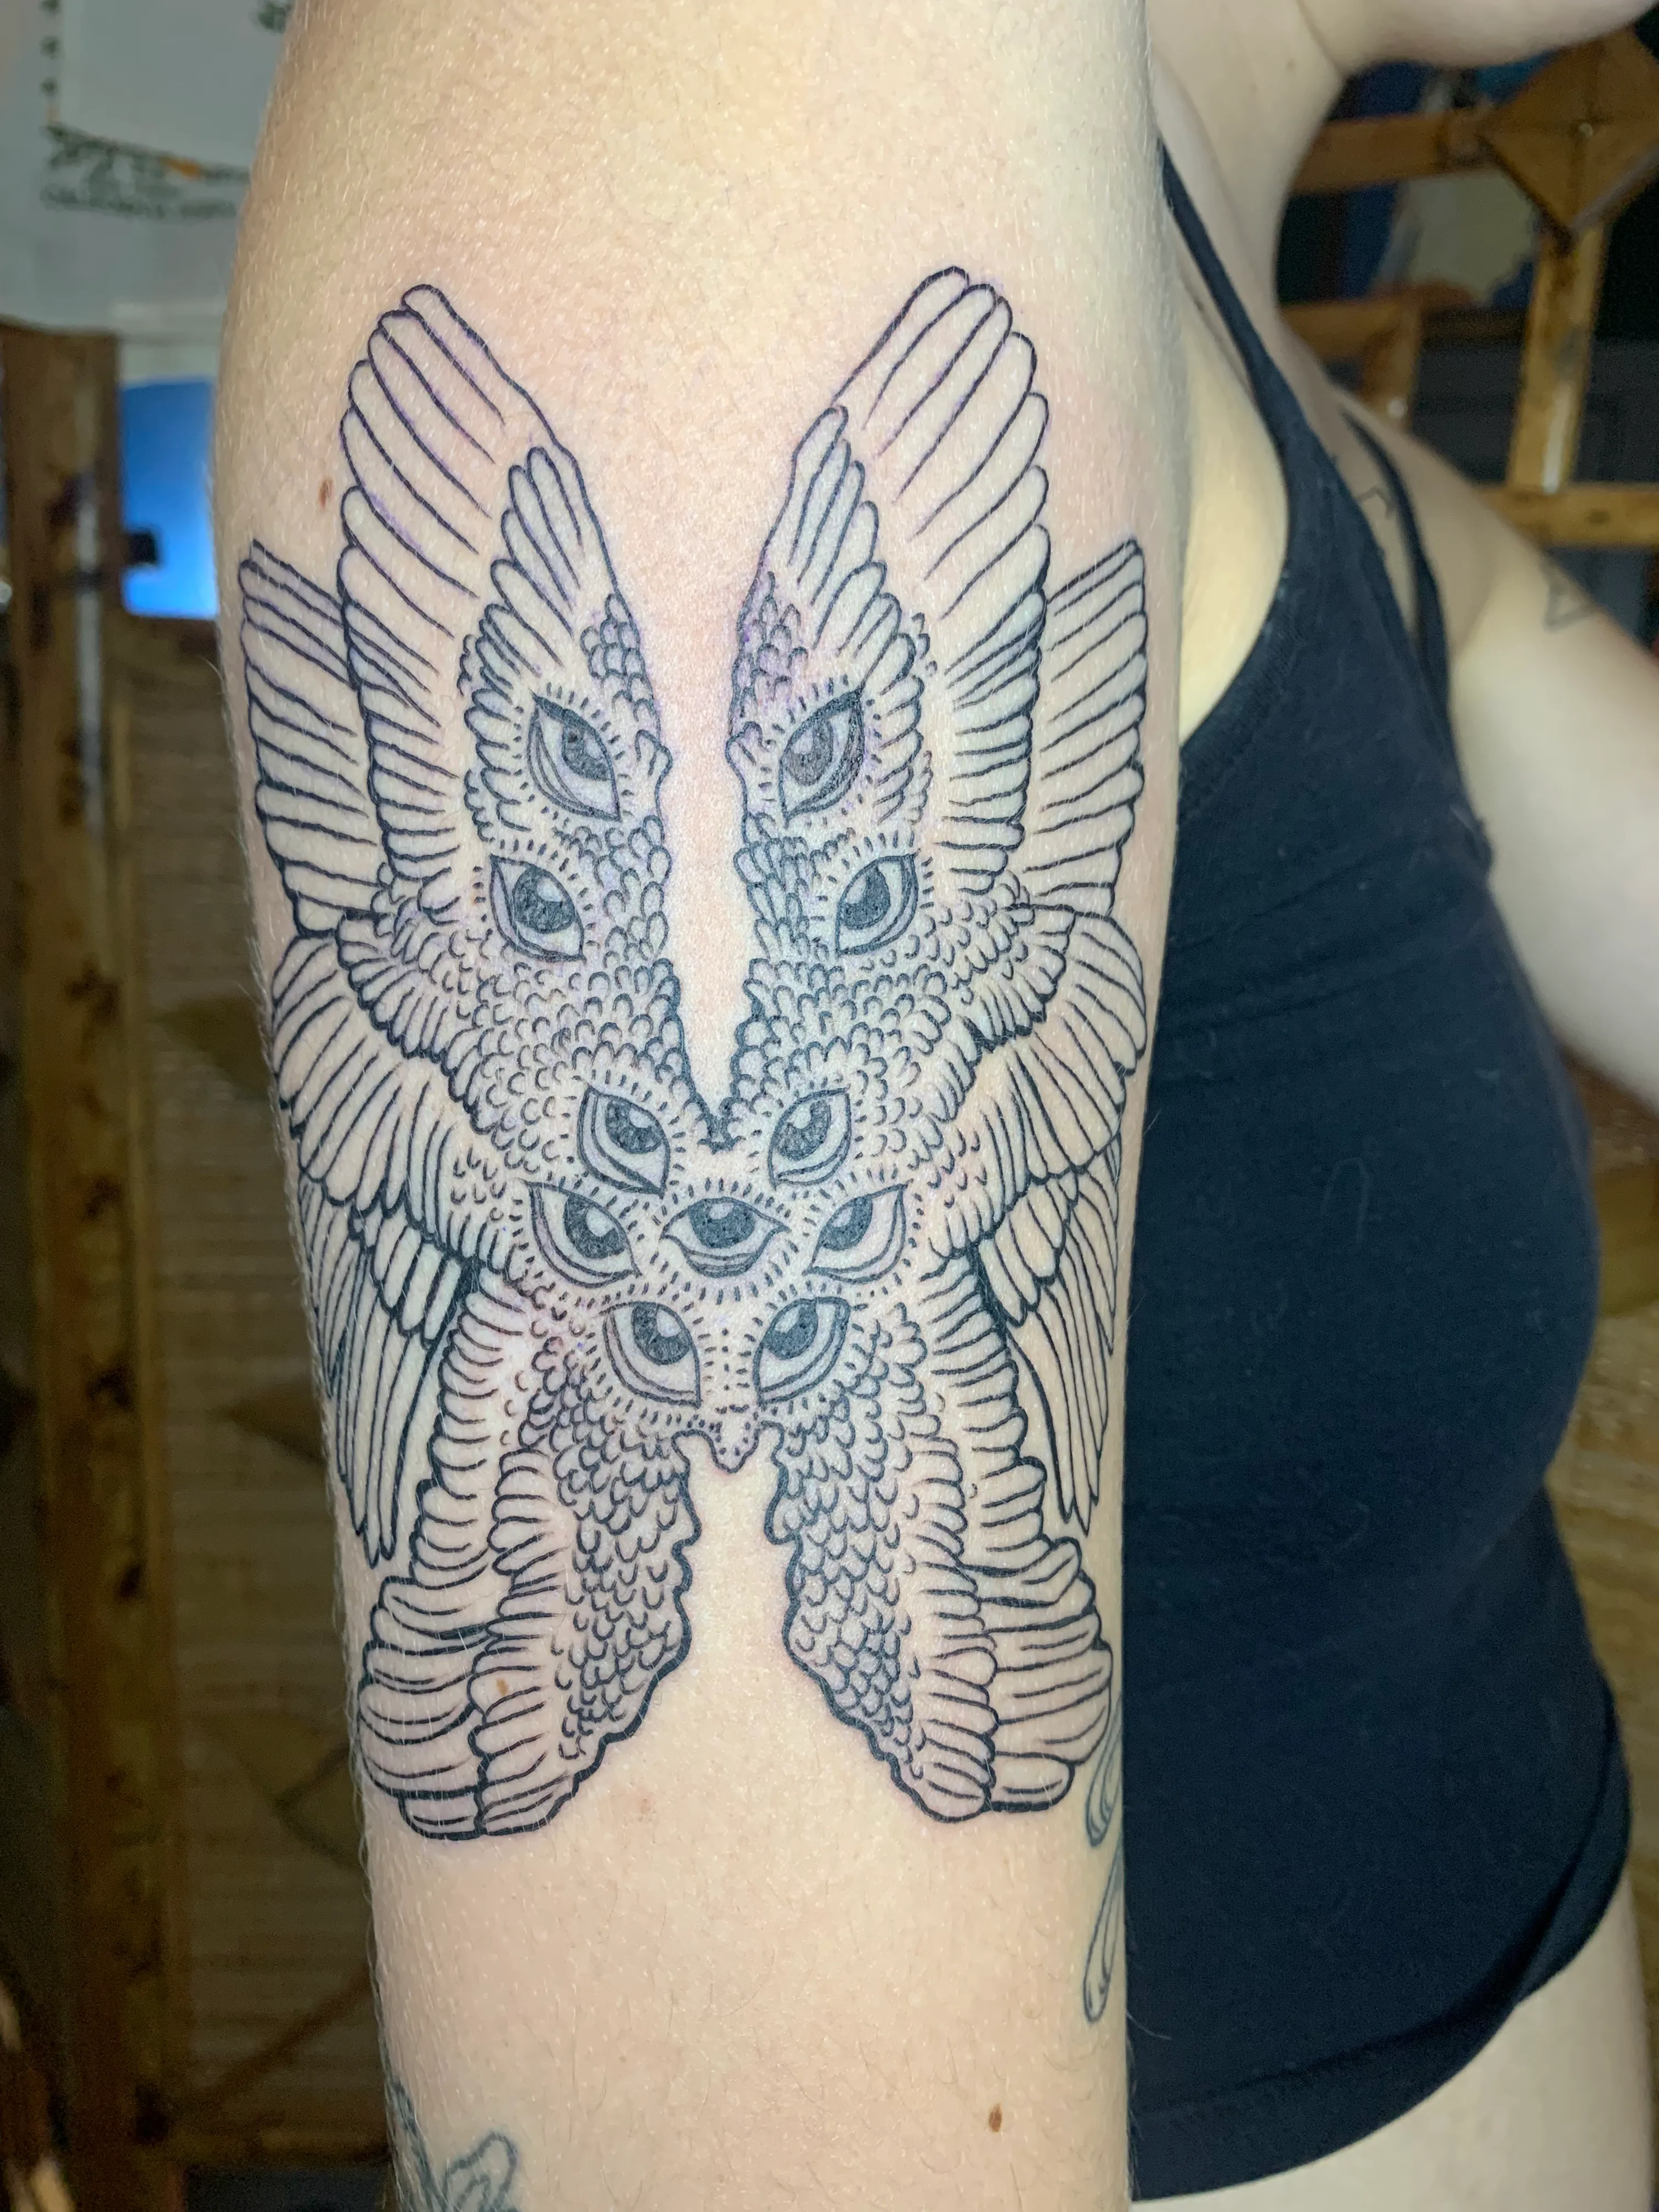 A large butterfly like creature with multiple eyes tattoo.